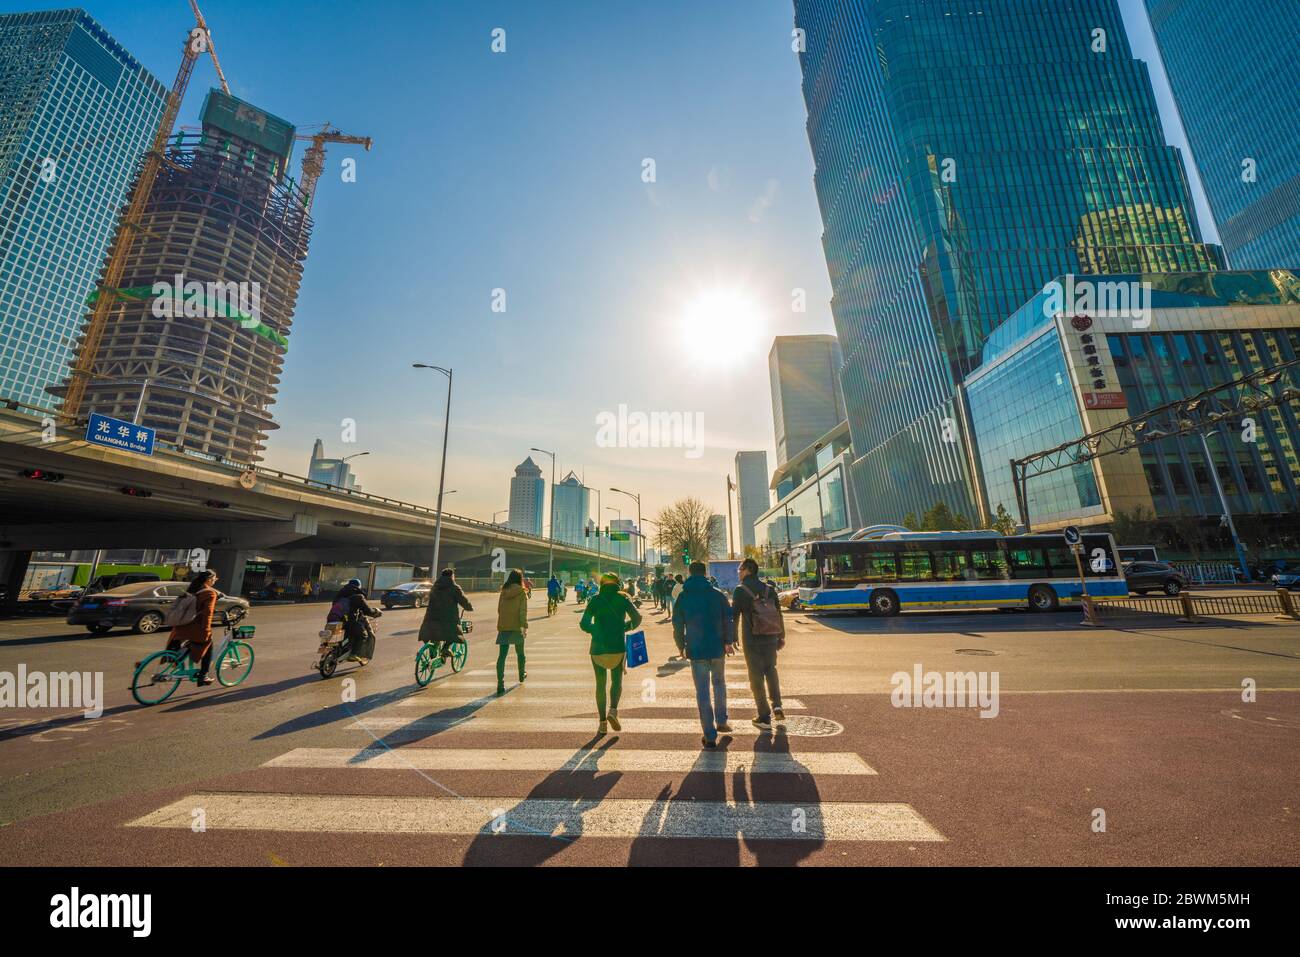 BEIJING, CHINA - NOVEMBER 26: View of people crossing the road on a street in the Beijing Central Business District on November 26, 2019 in Beijing Stock Photo